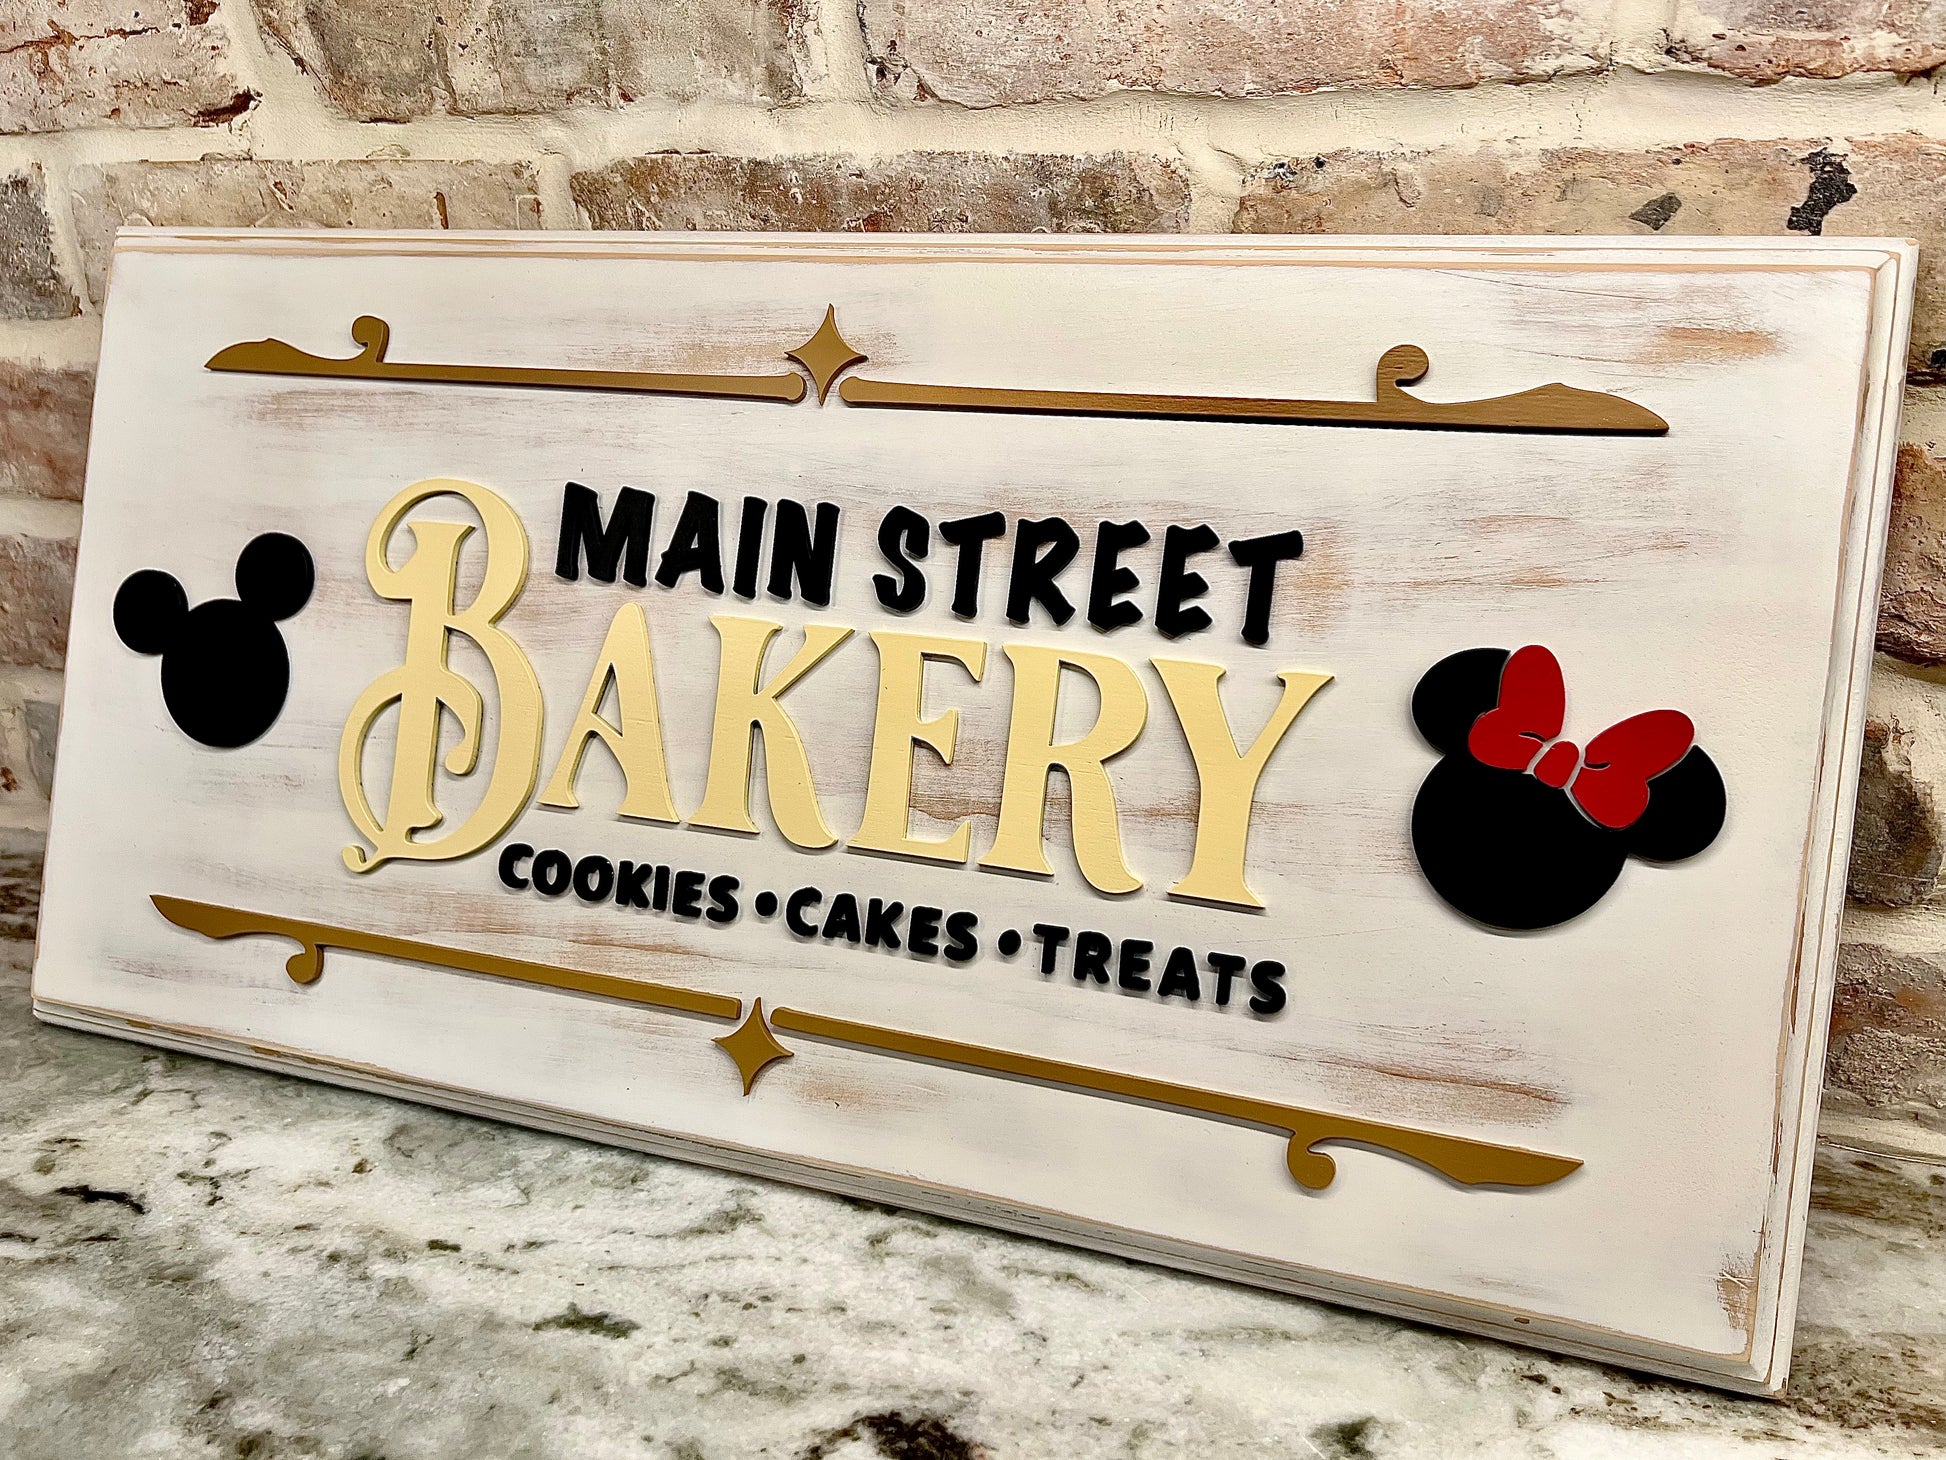 Large Minnie Mouse Bakery Sign Main Street Bakery Sign 